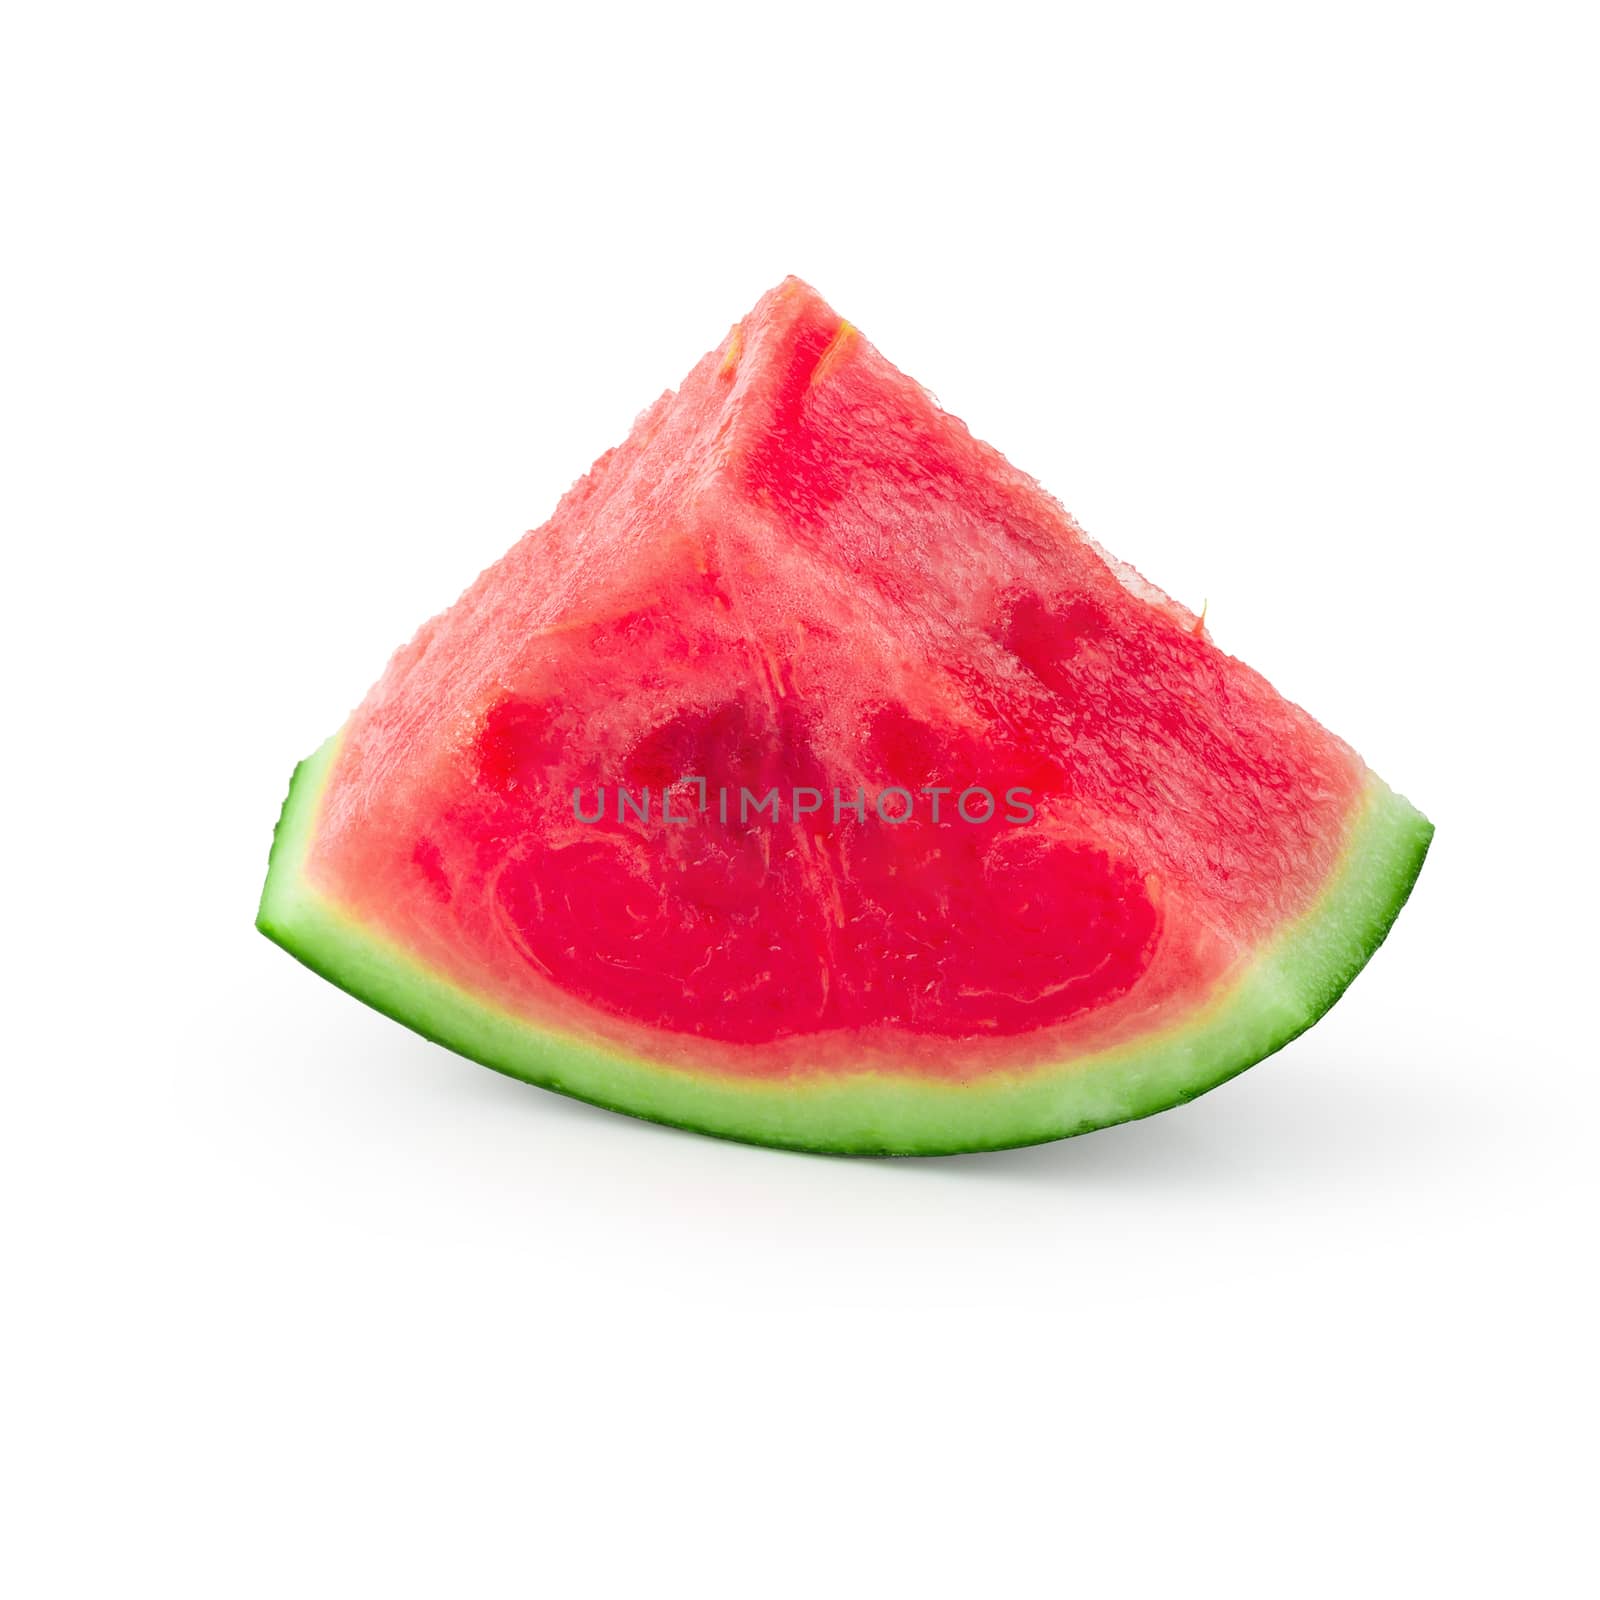 Sliced of watermelon isolated on a white background.